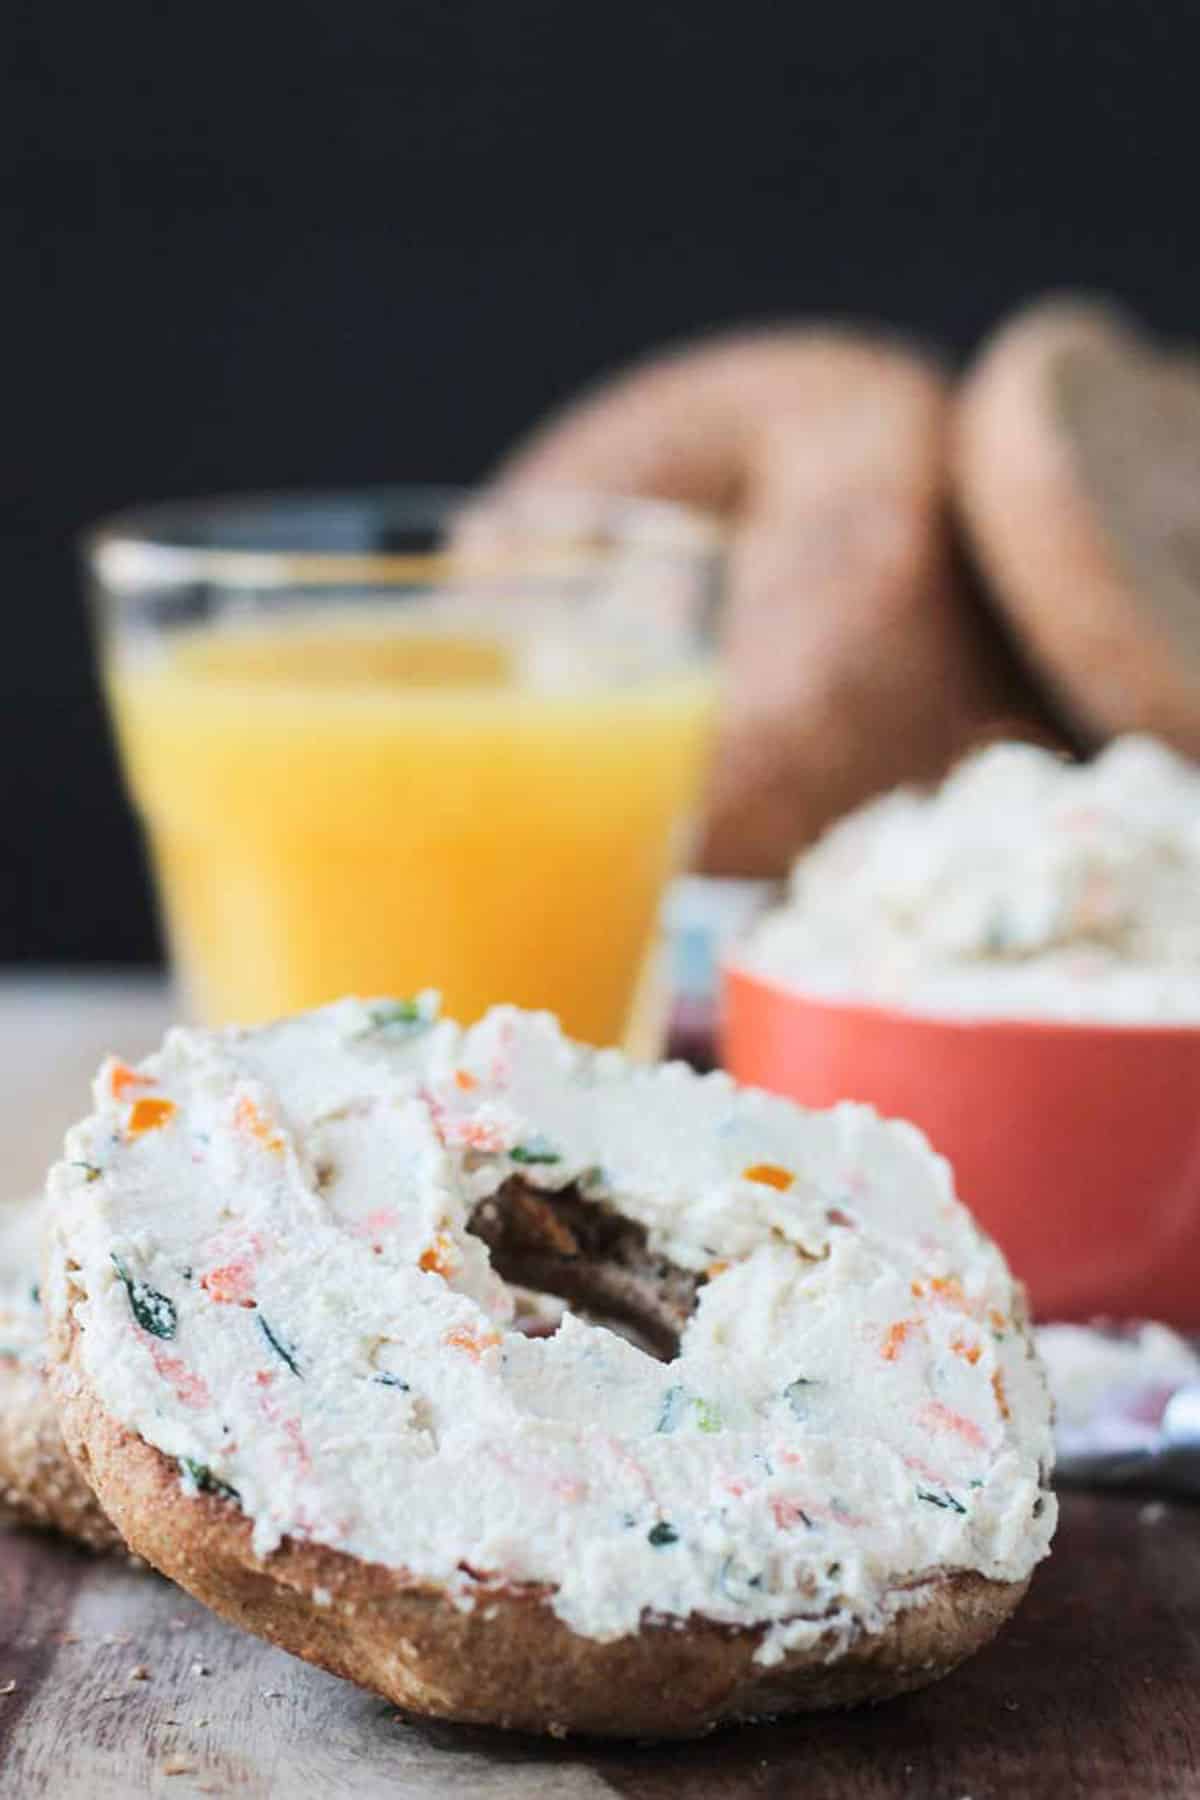 Veggie cream cheese spread on a bagel half in front of a glass of orange juice.